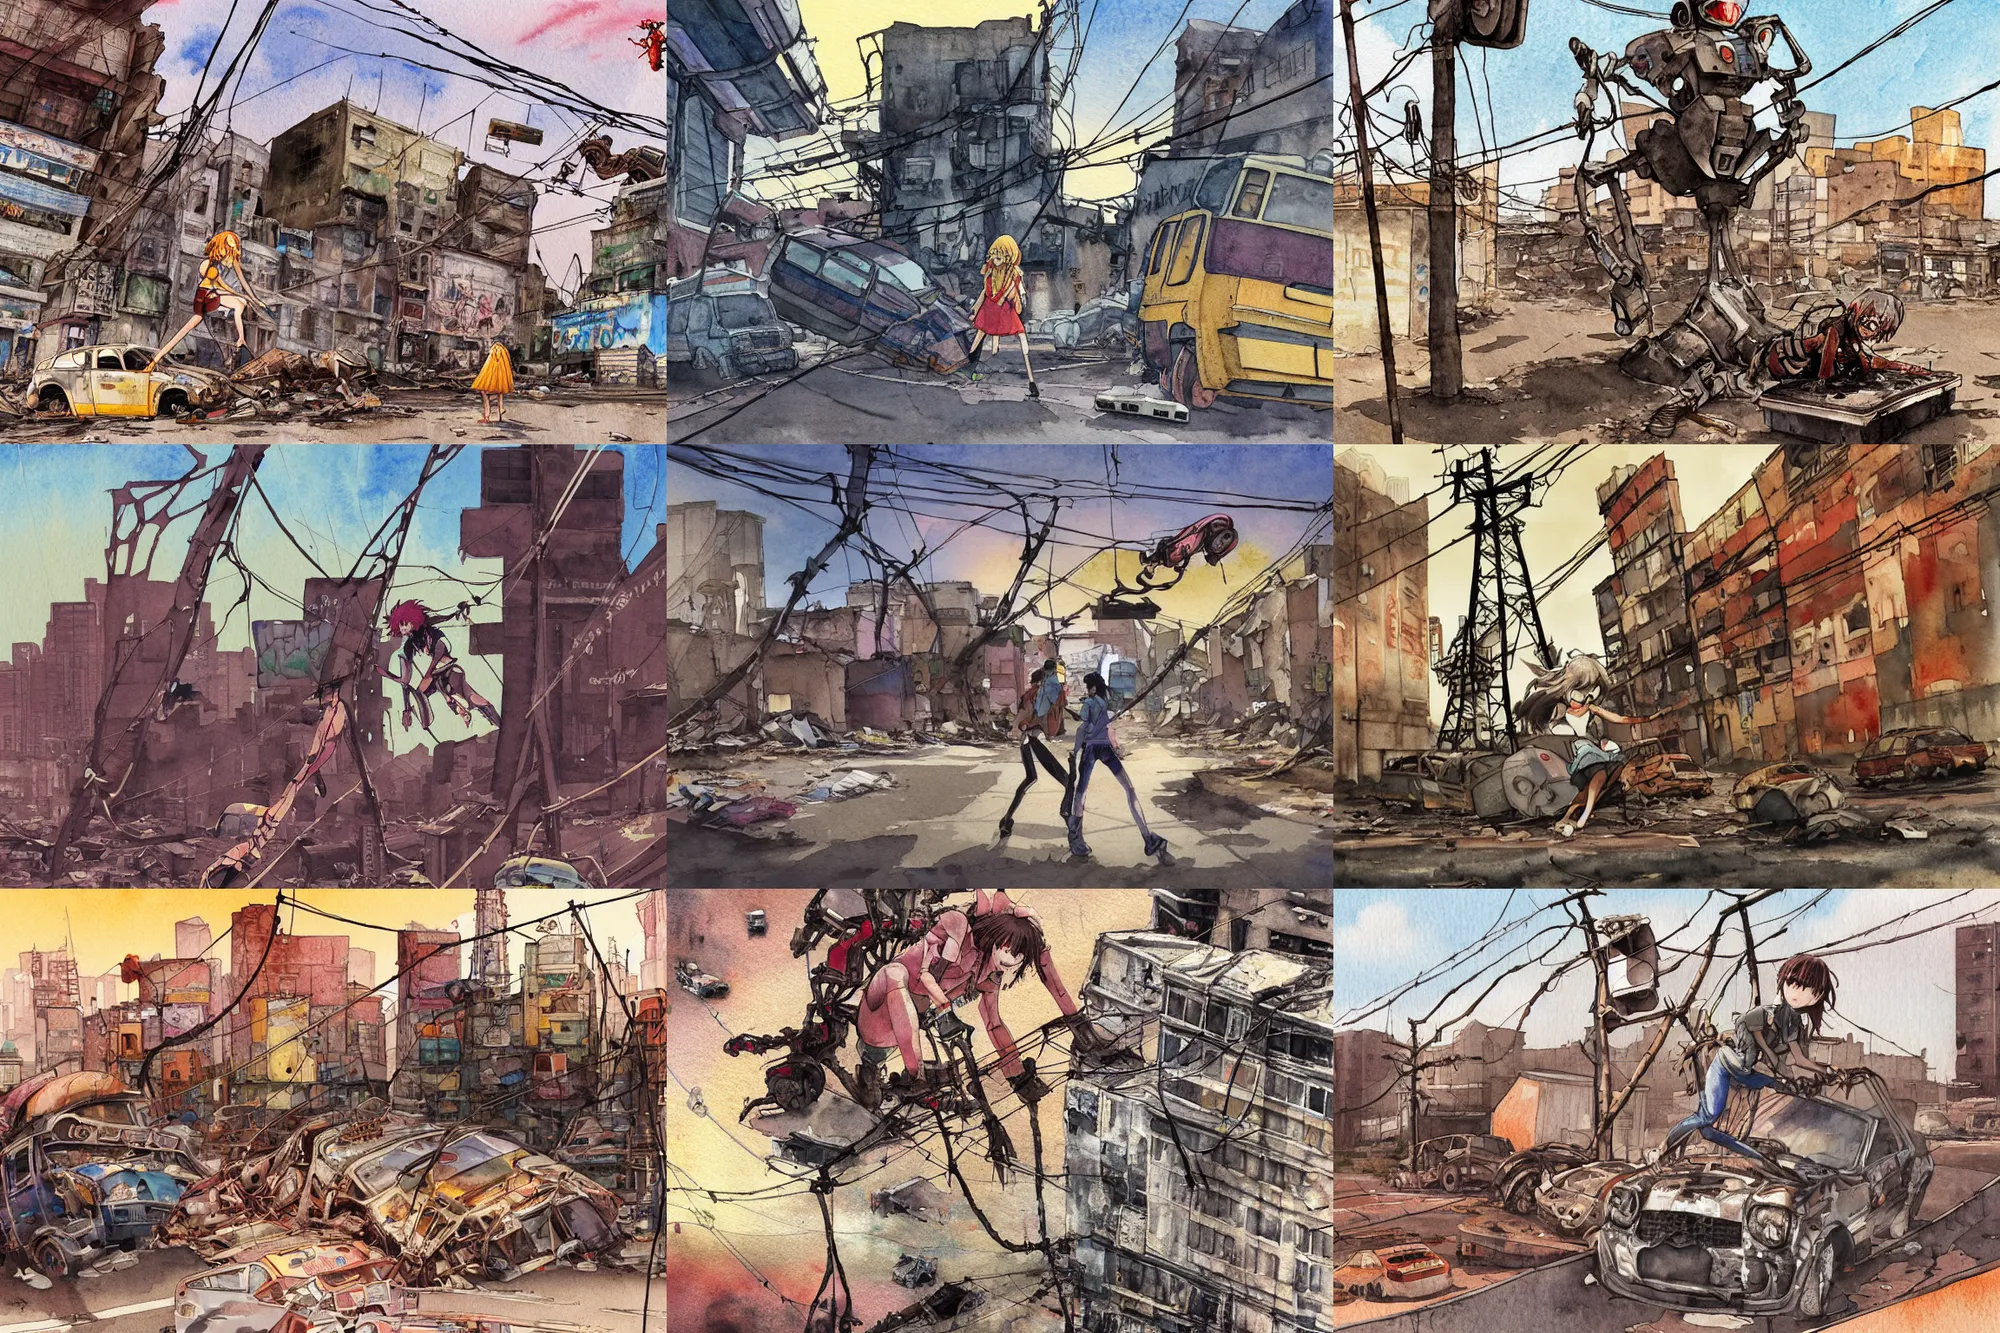 Prompt: detailed artwork, simple watercolor, harsh bloom lighting, rim light, abandoned city, drawn girl climbing a dead corpse rusty evangelion robot crashed in deserted dusty shinjuku junk town, tangled overhead wires, telephone pole, old pawn shop, broken tv, harsh shadows, pale yellow sky, bold graffiti